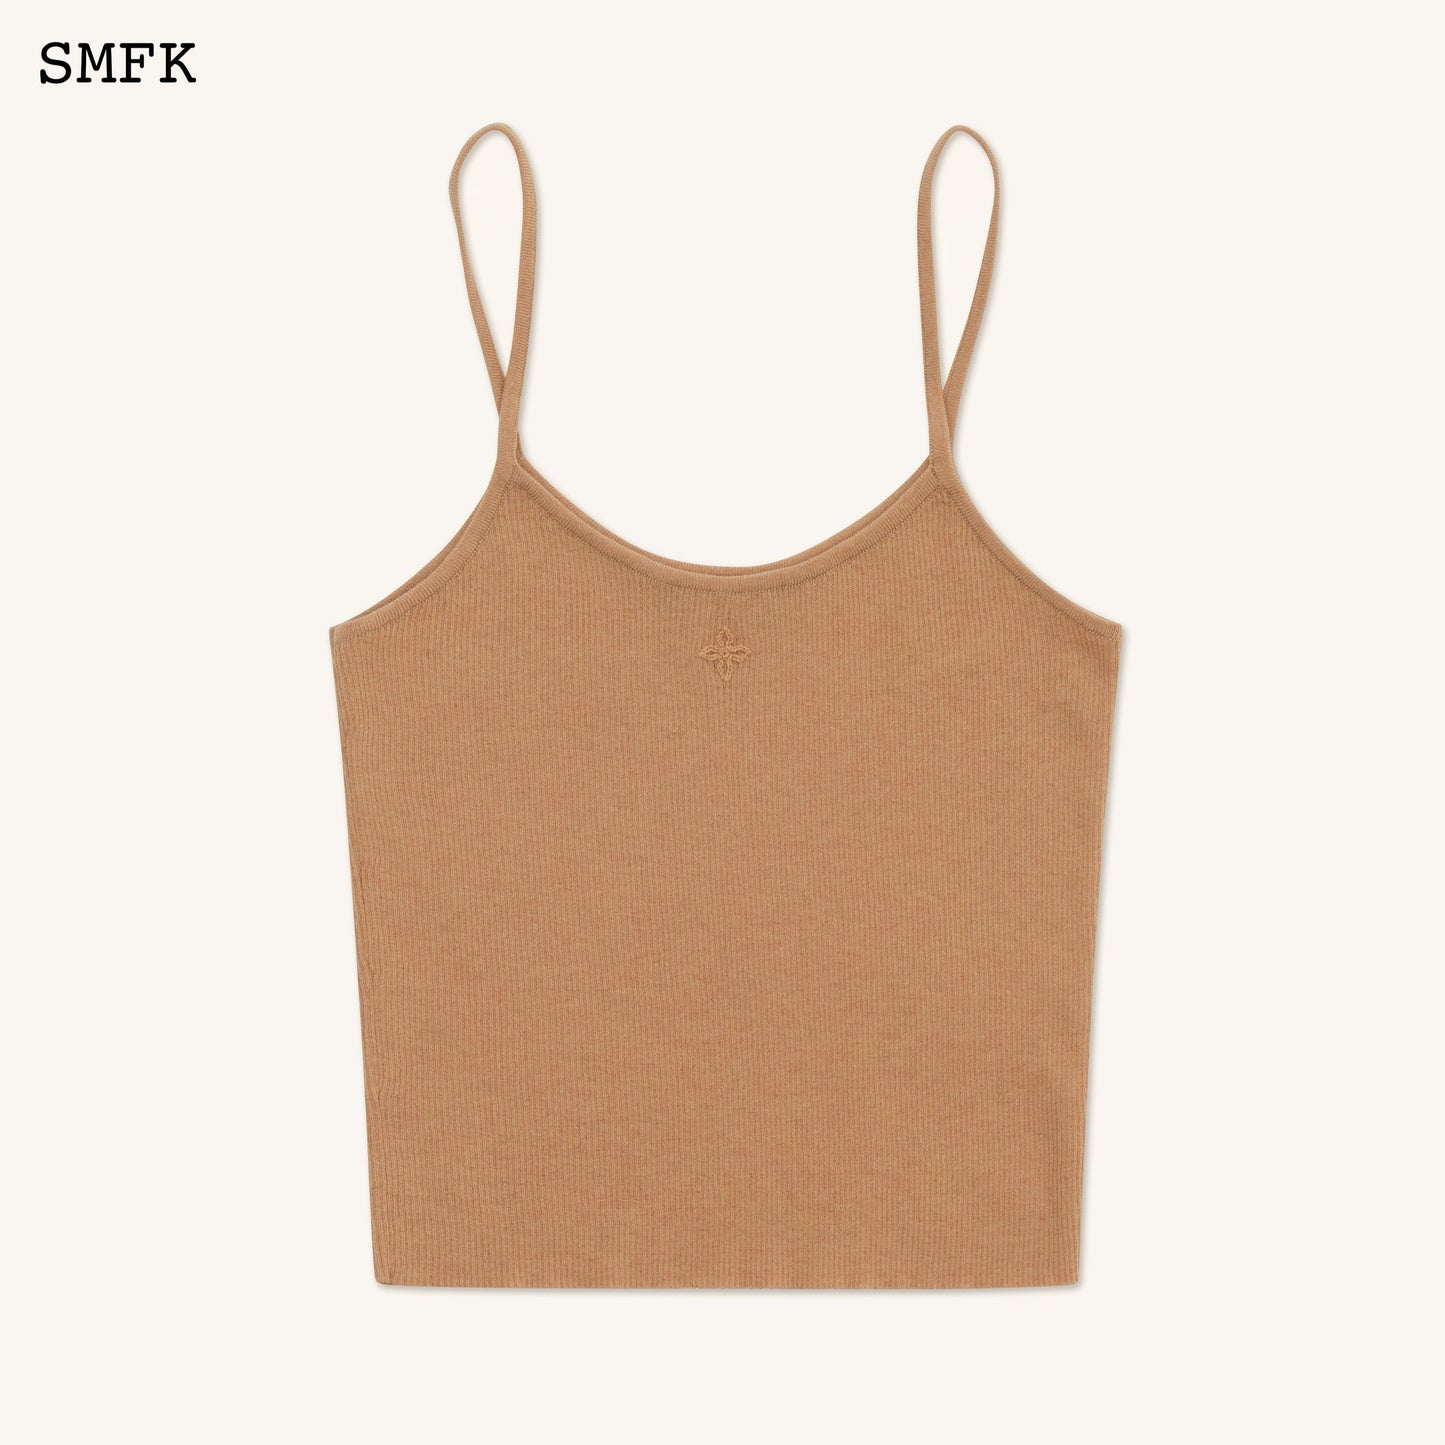 SMFK Compass Cross Classic Knitted Vest Top Nude